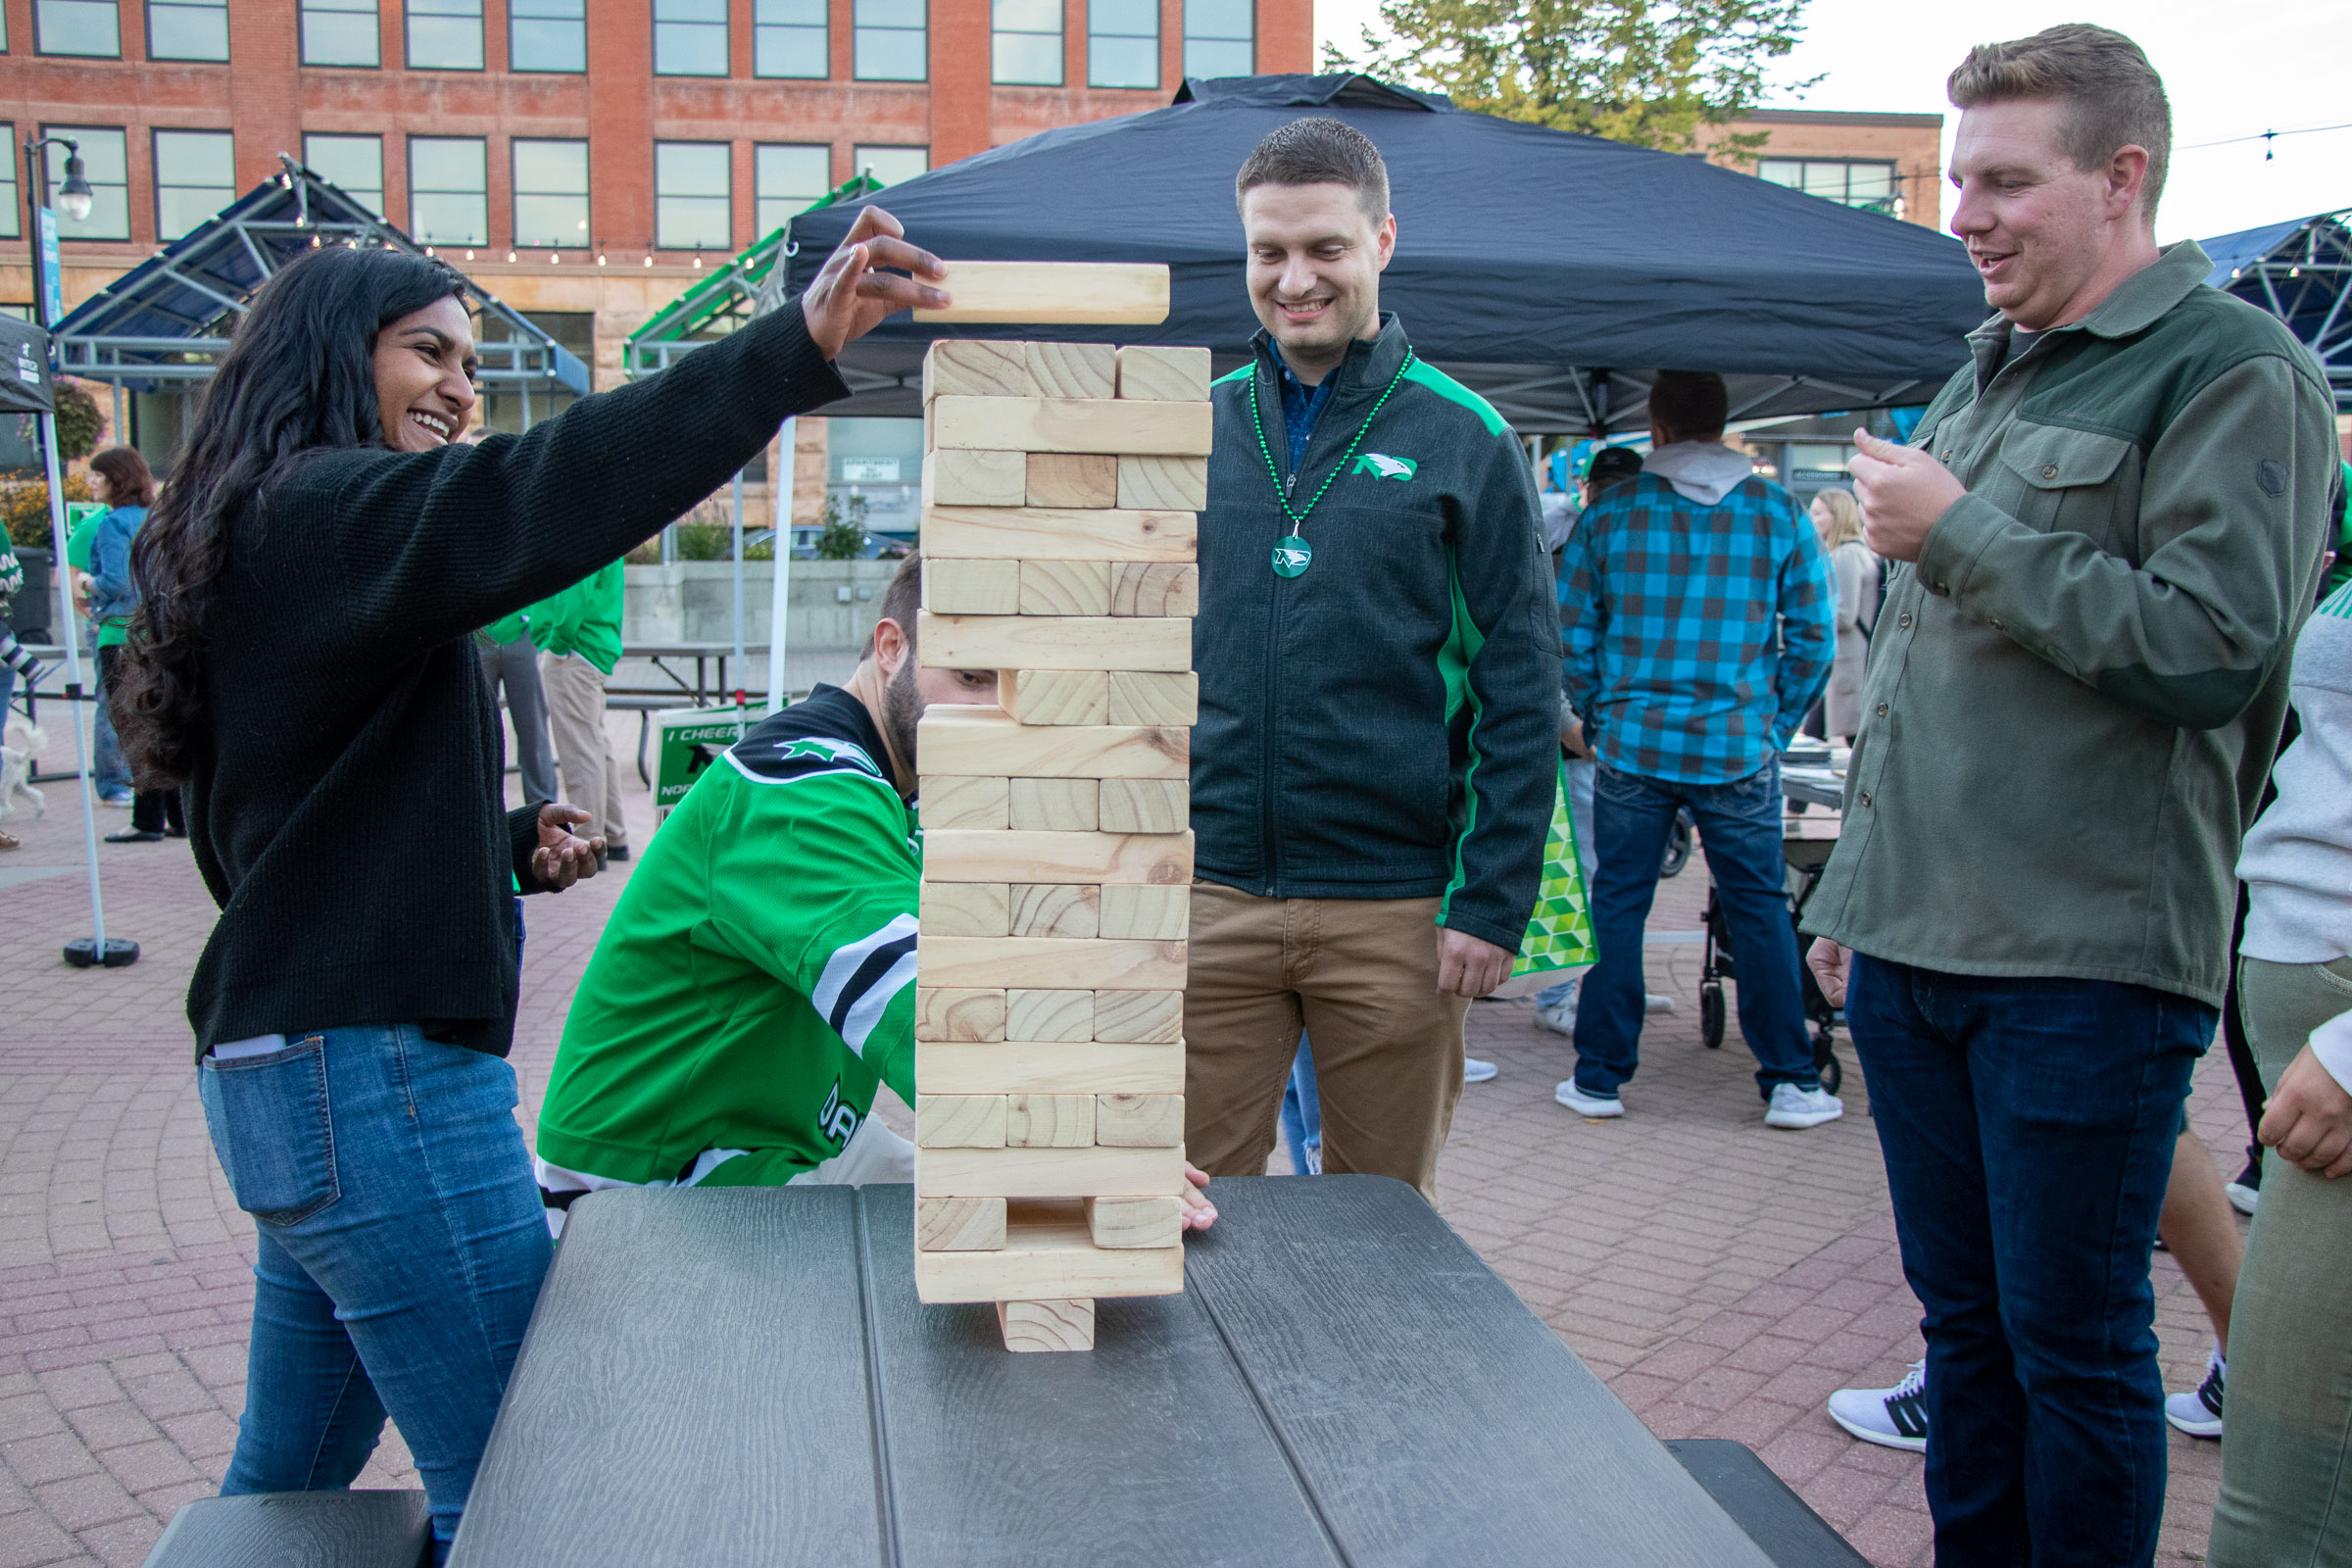 Four people, including WCT writer Paul, gather around a picnic table in Grand Forks Town Square to play an oversized game of Jenga.